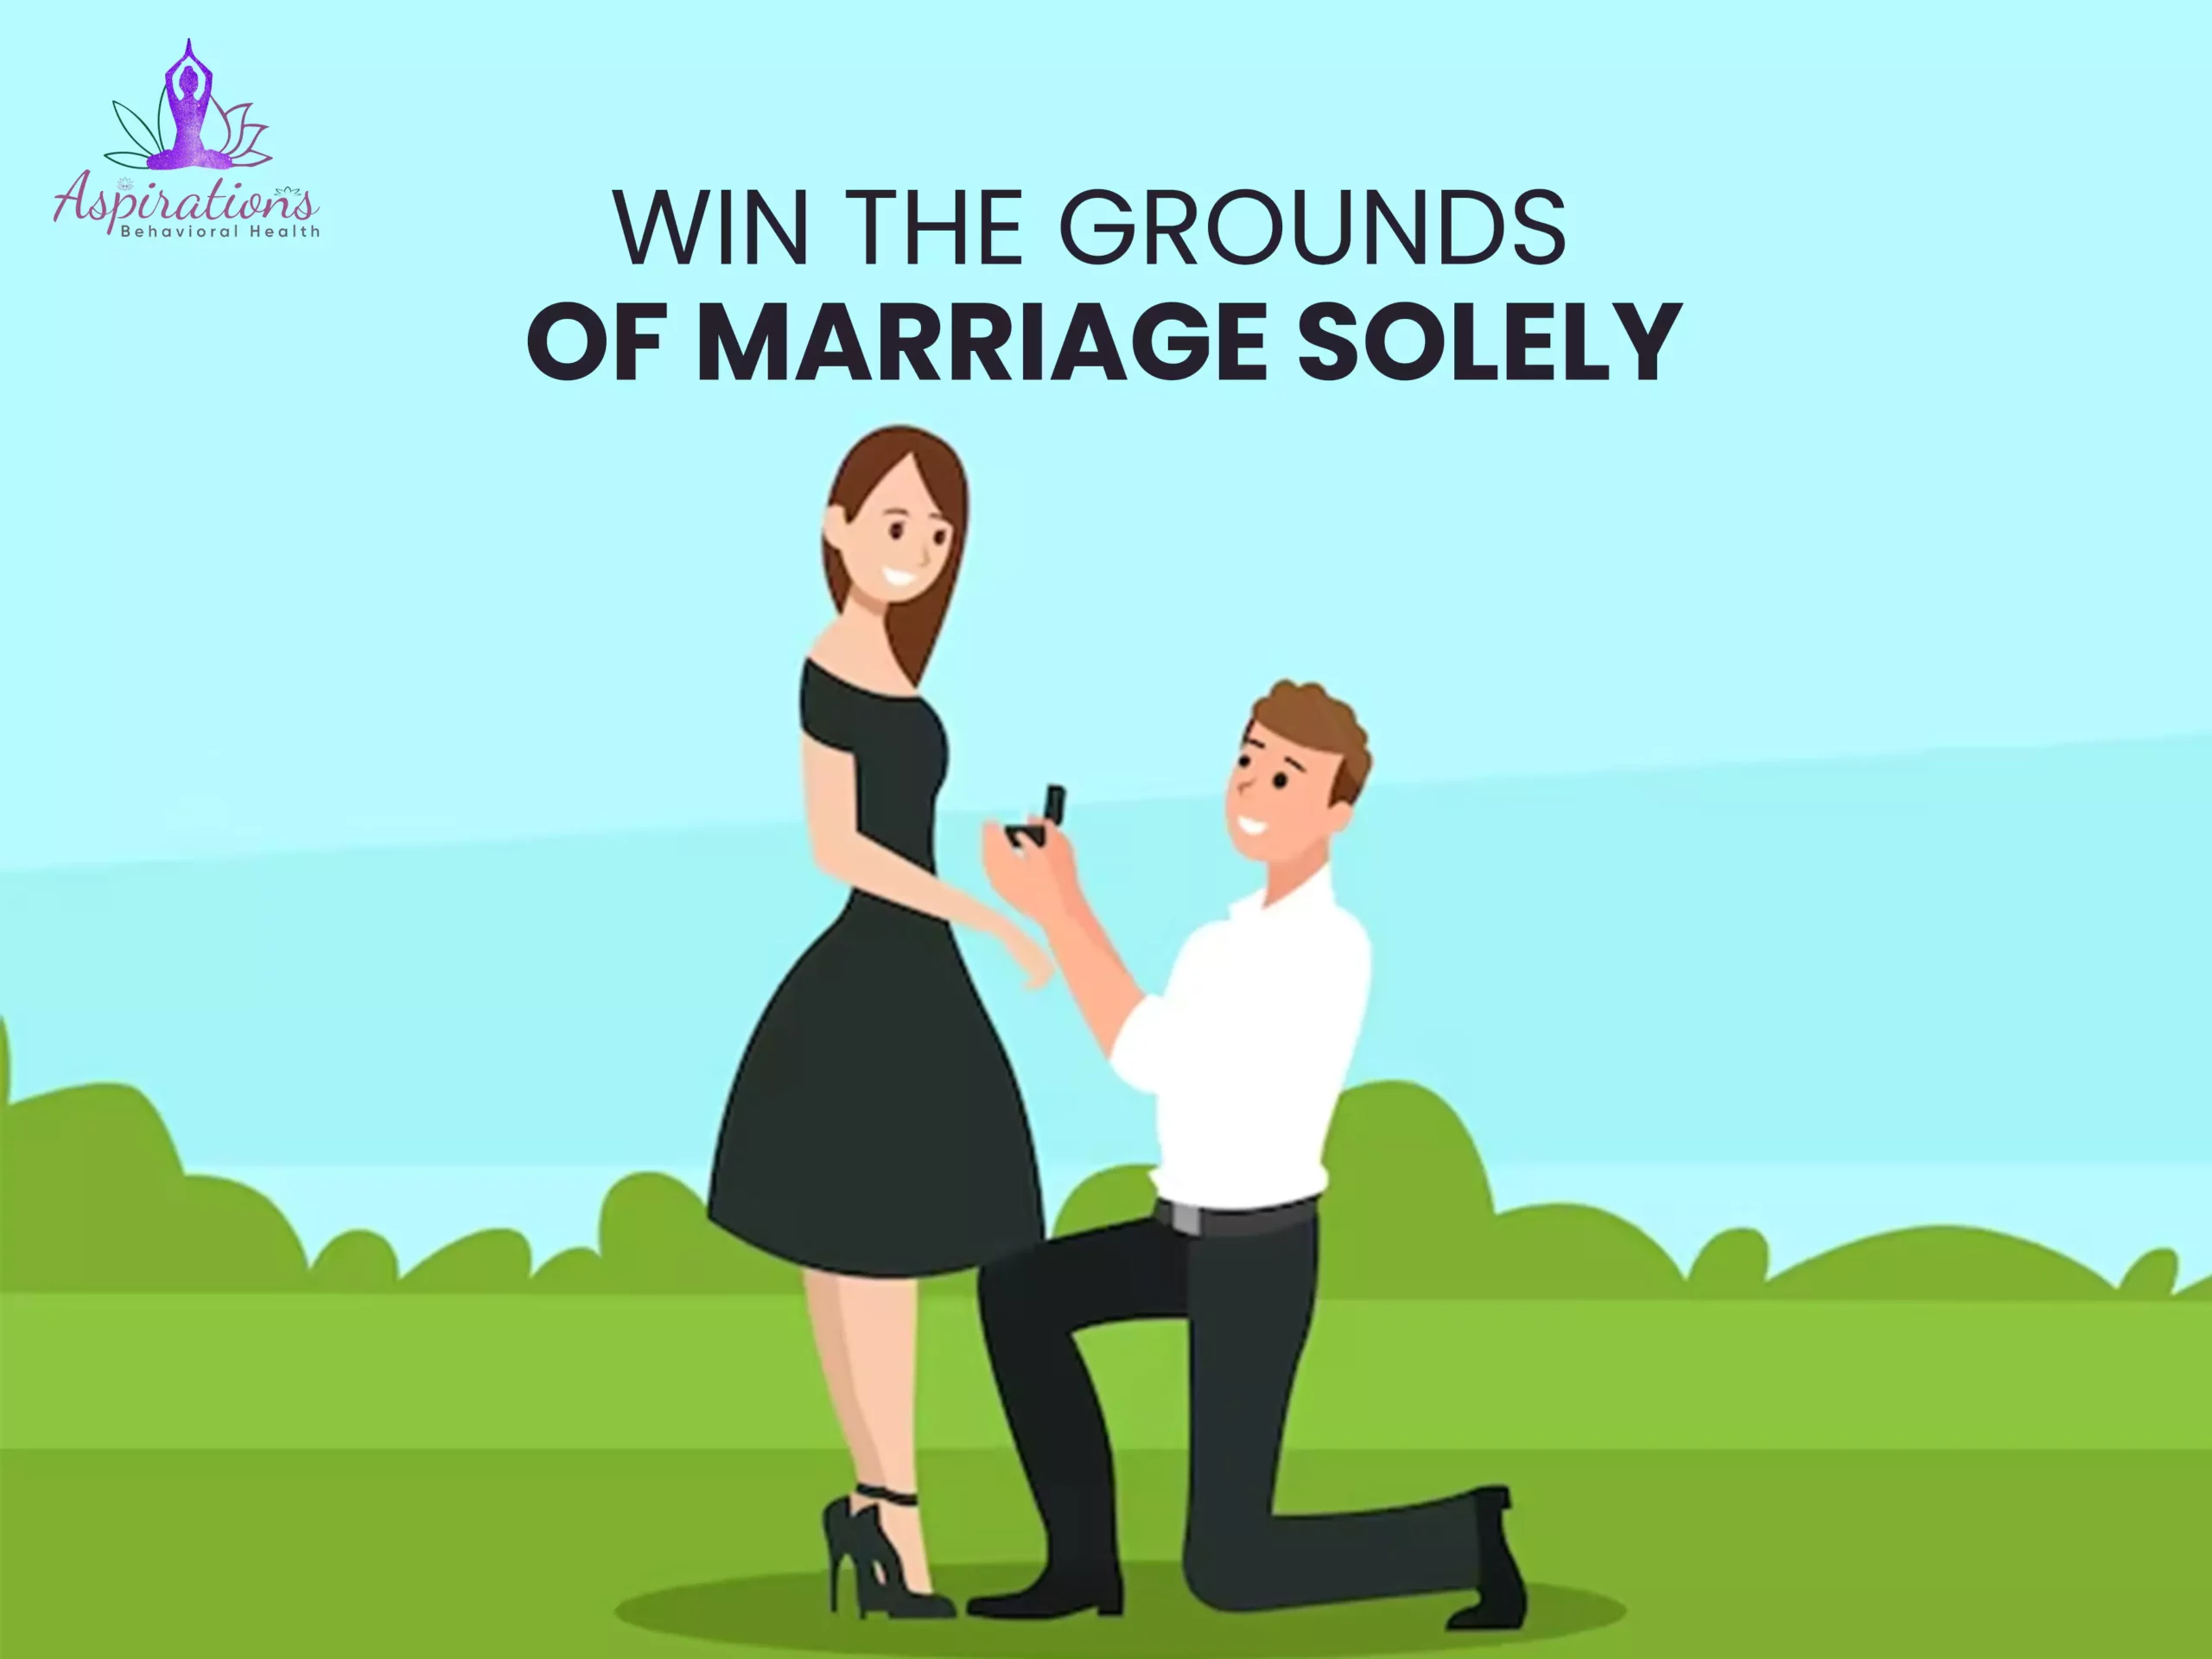 Win the Grounds of Marriage Solely